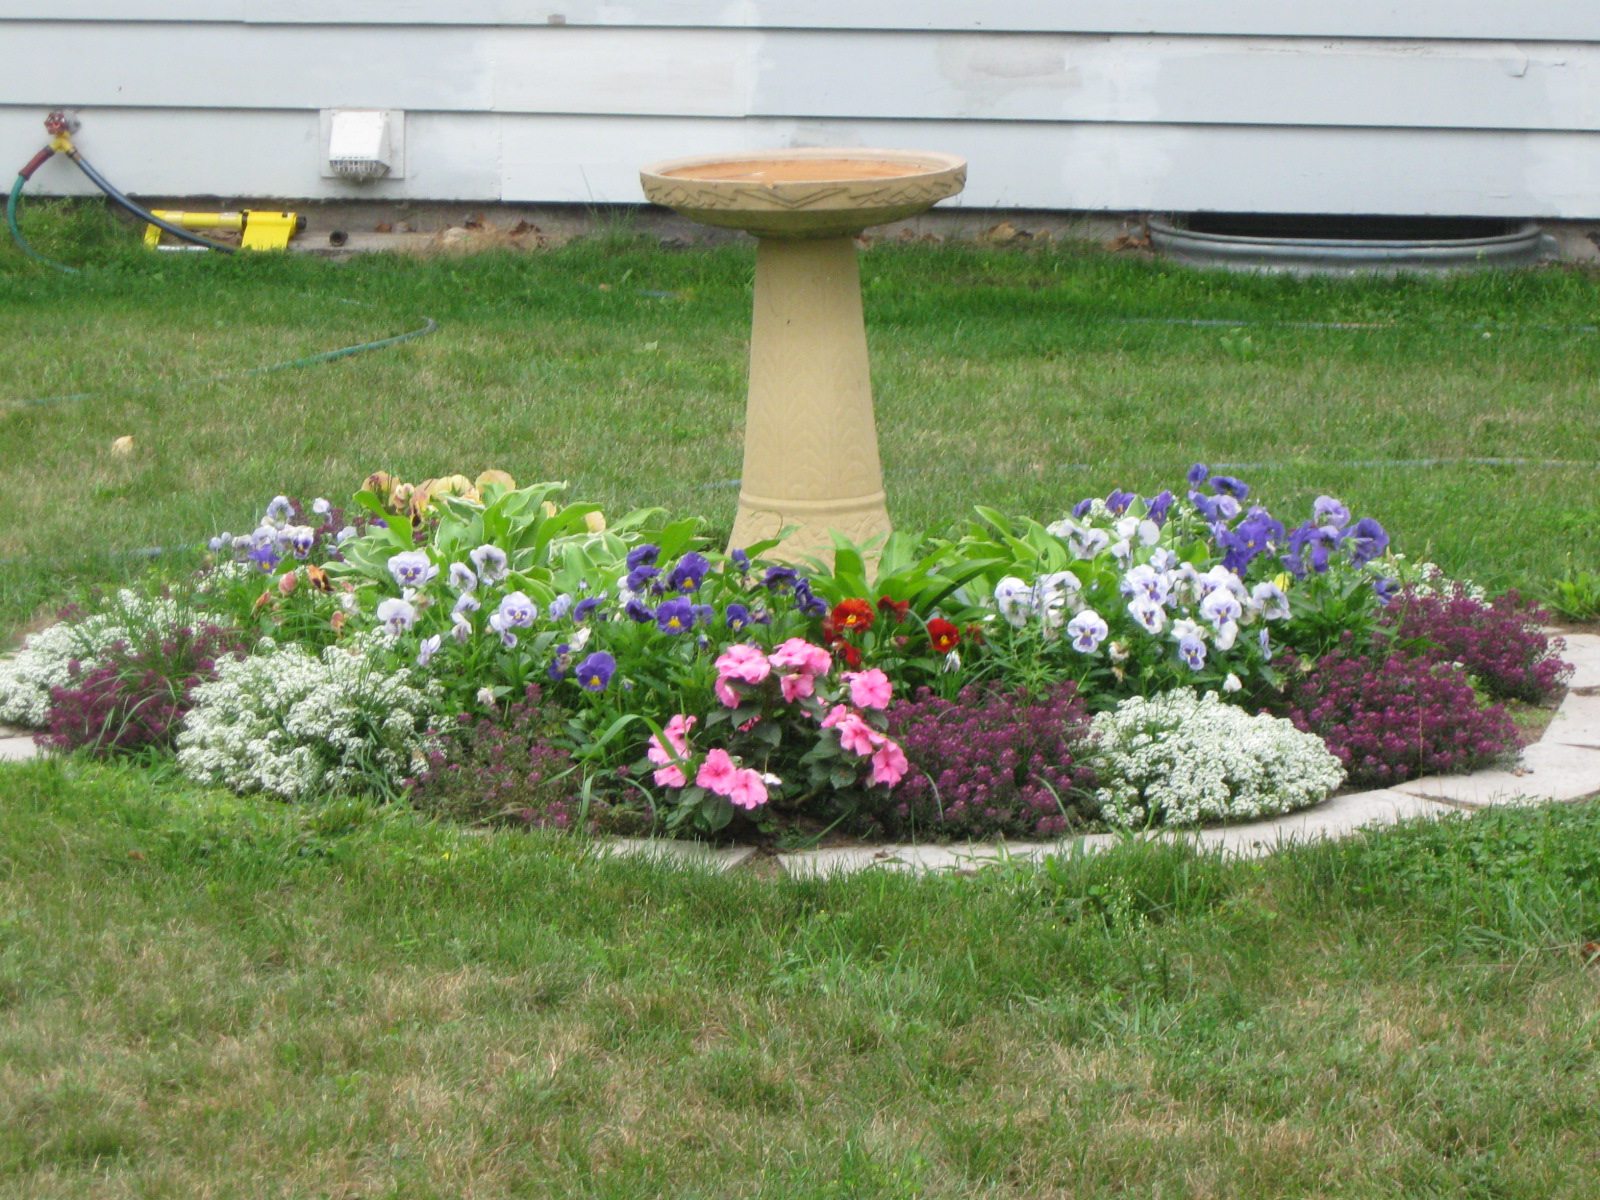 What can I plant near my septic system? - Beltz Liquid Waste Management